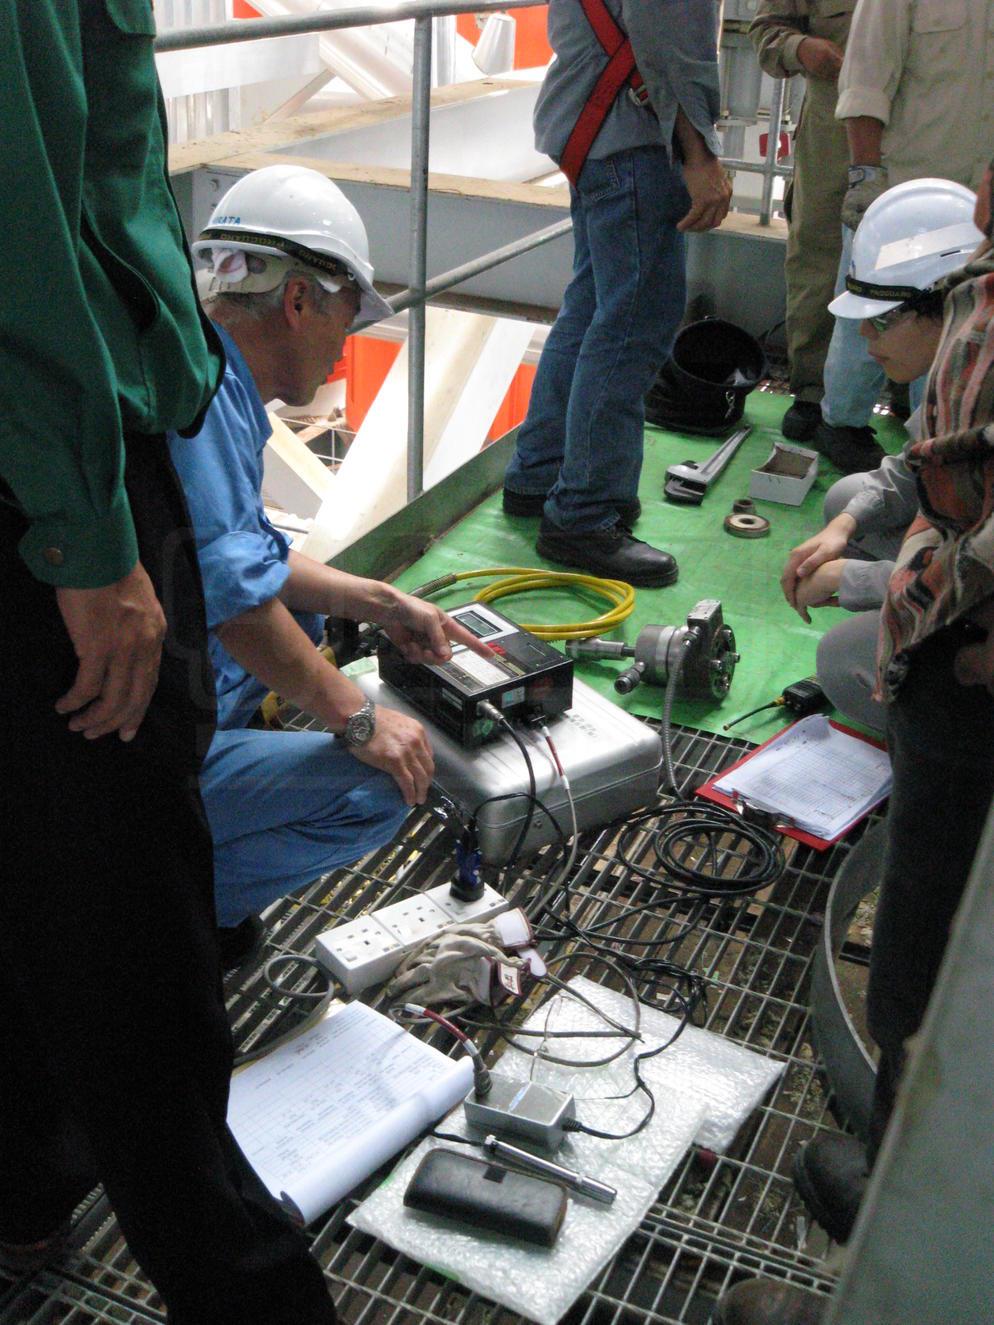 Competent on NDT and noise mapping survey